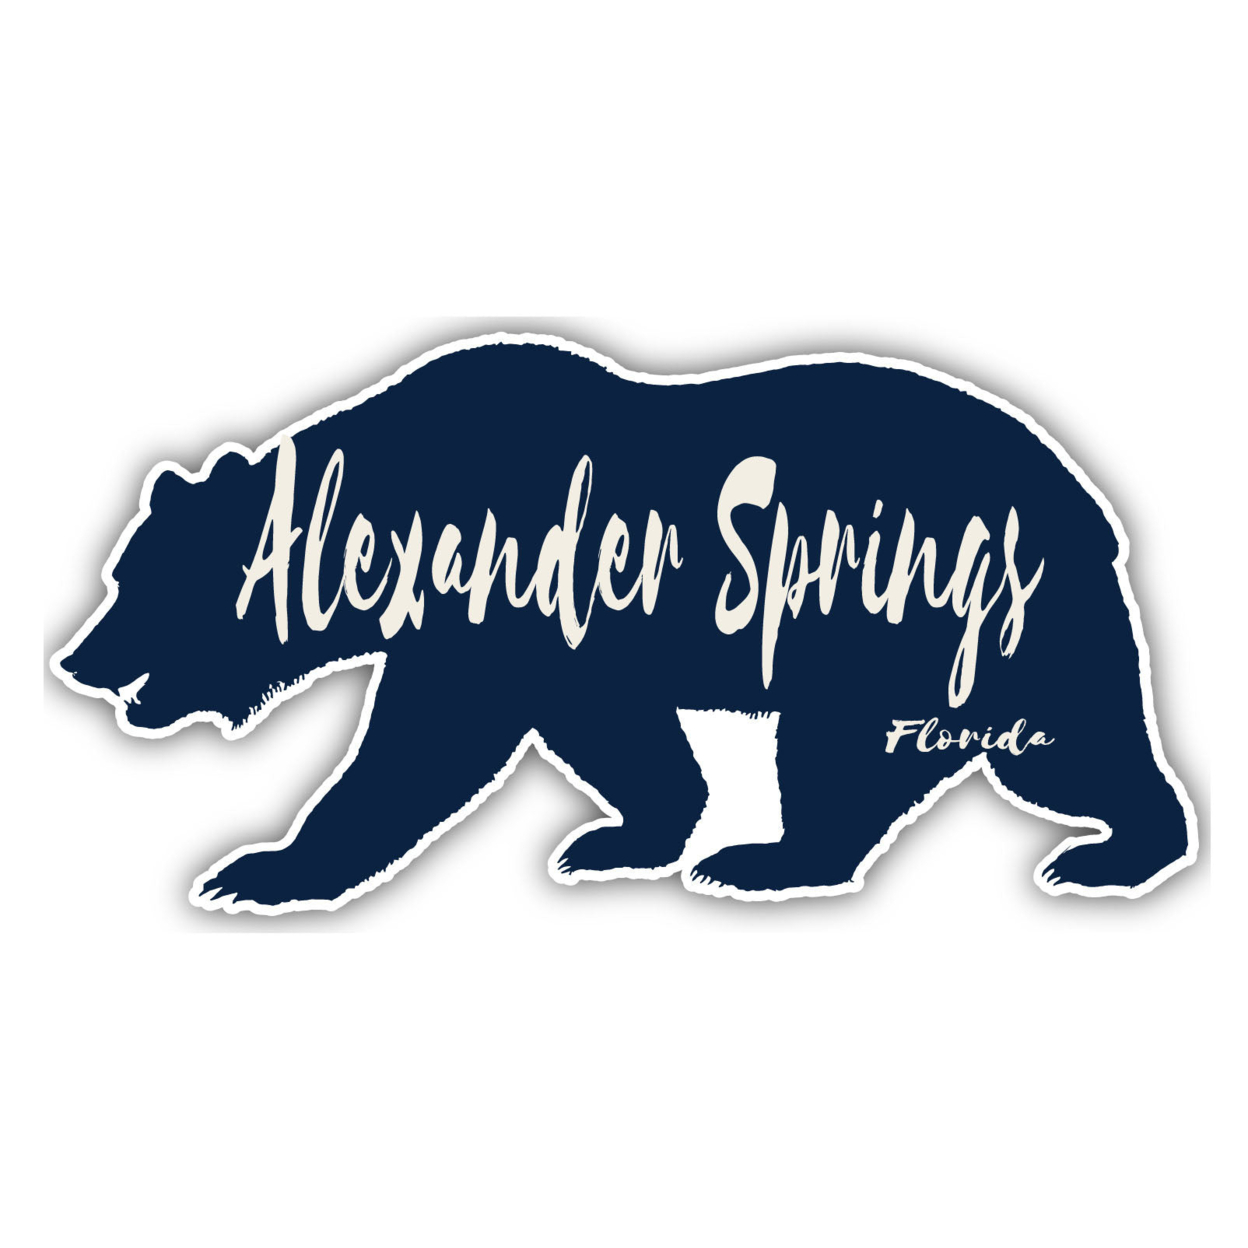 Alexander Springs Florida Souvenir Decorative Stickers (Choose Theme And Size) - 4-Pack, 6-Inch, Bear